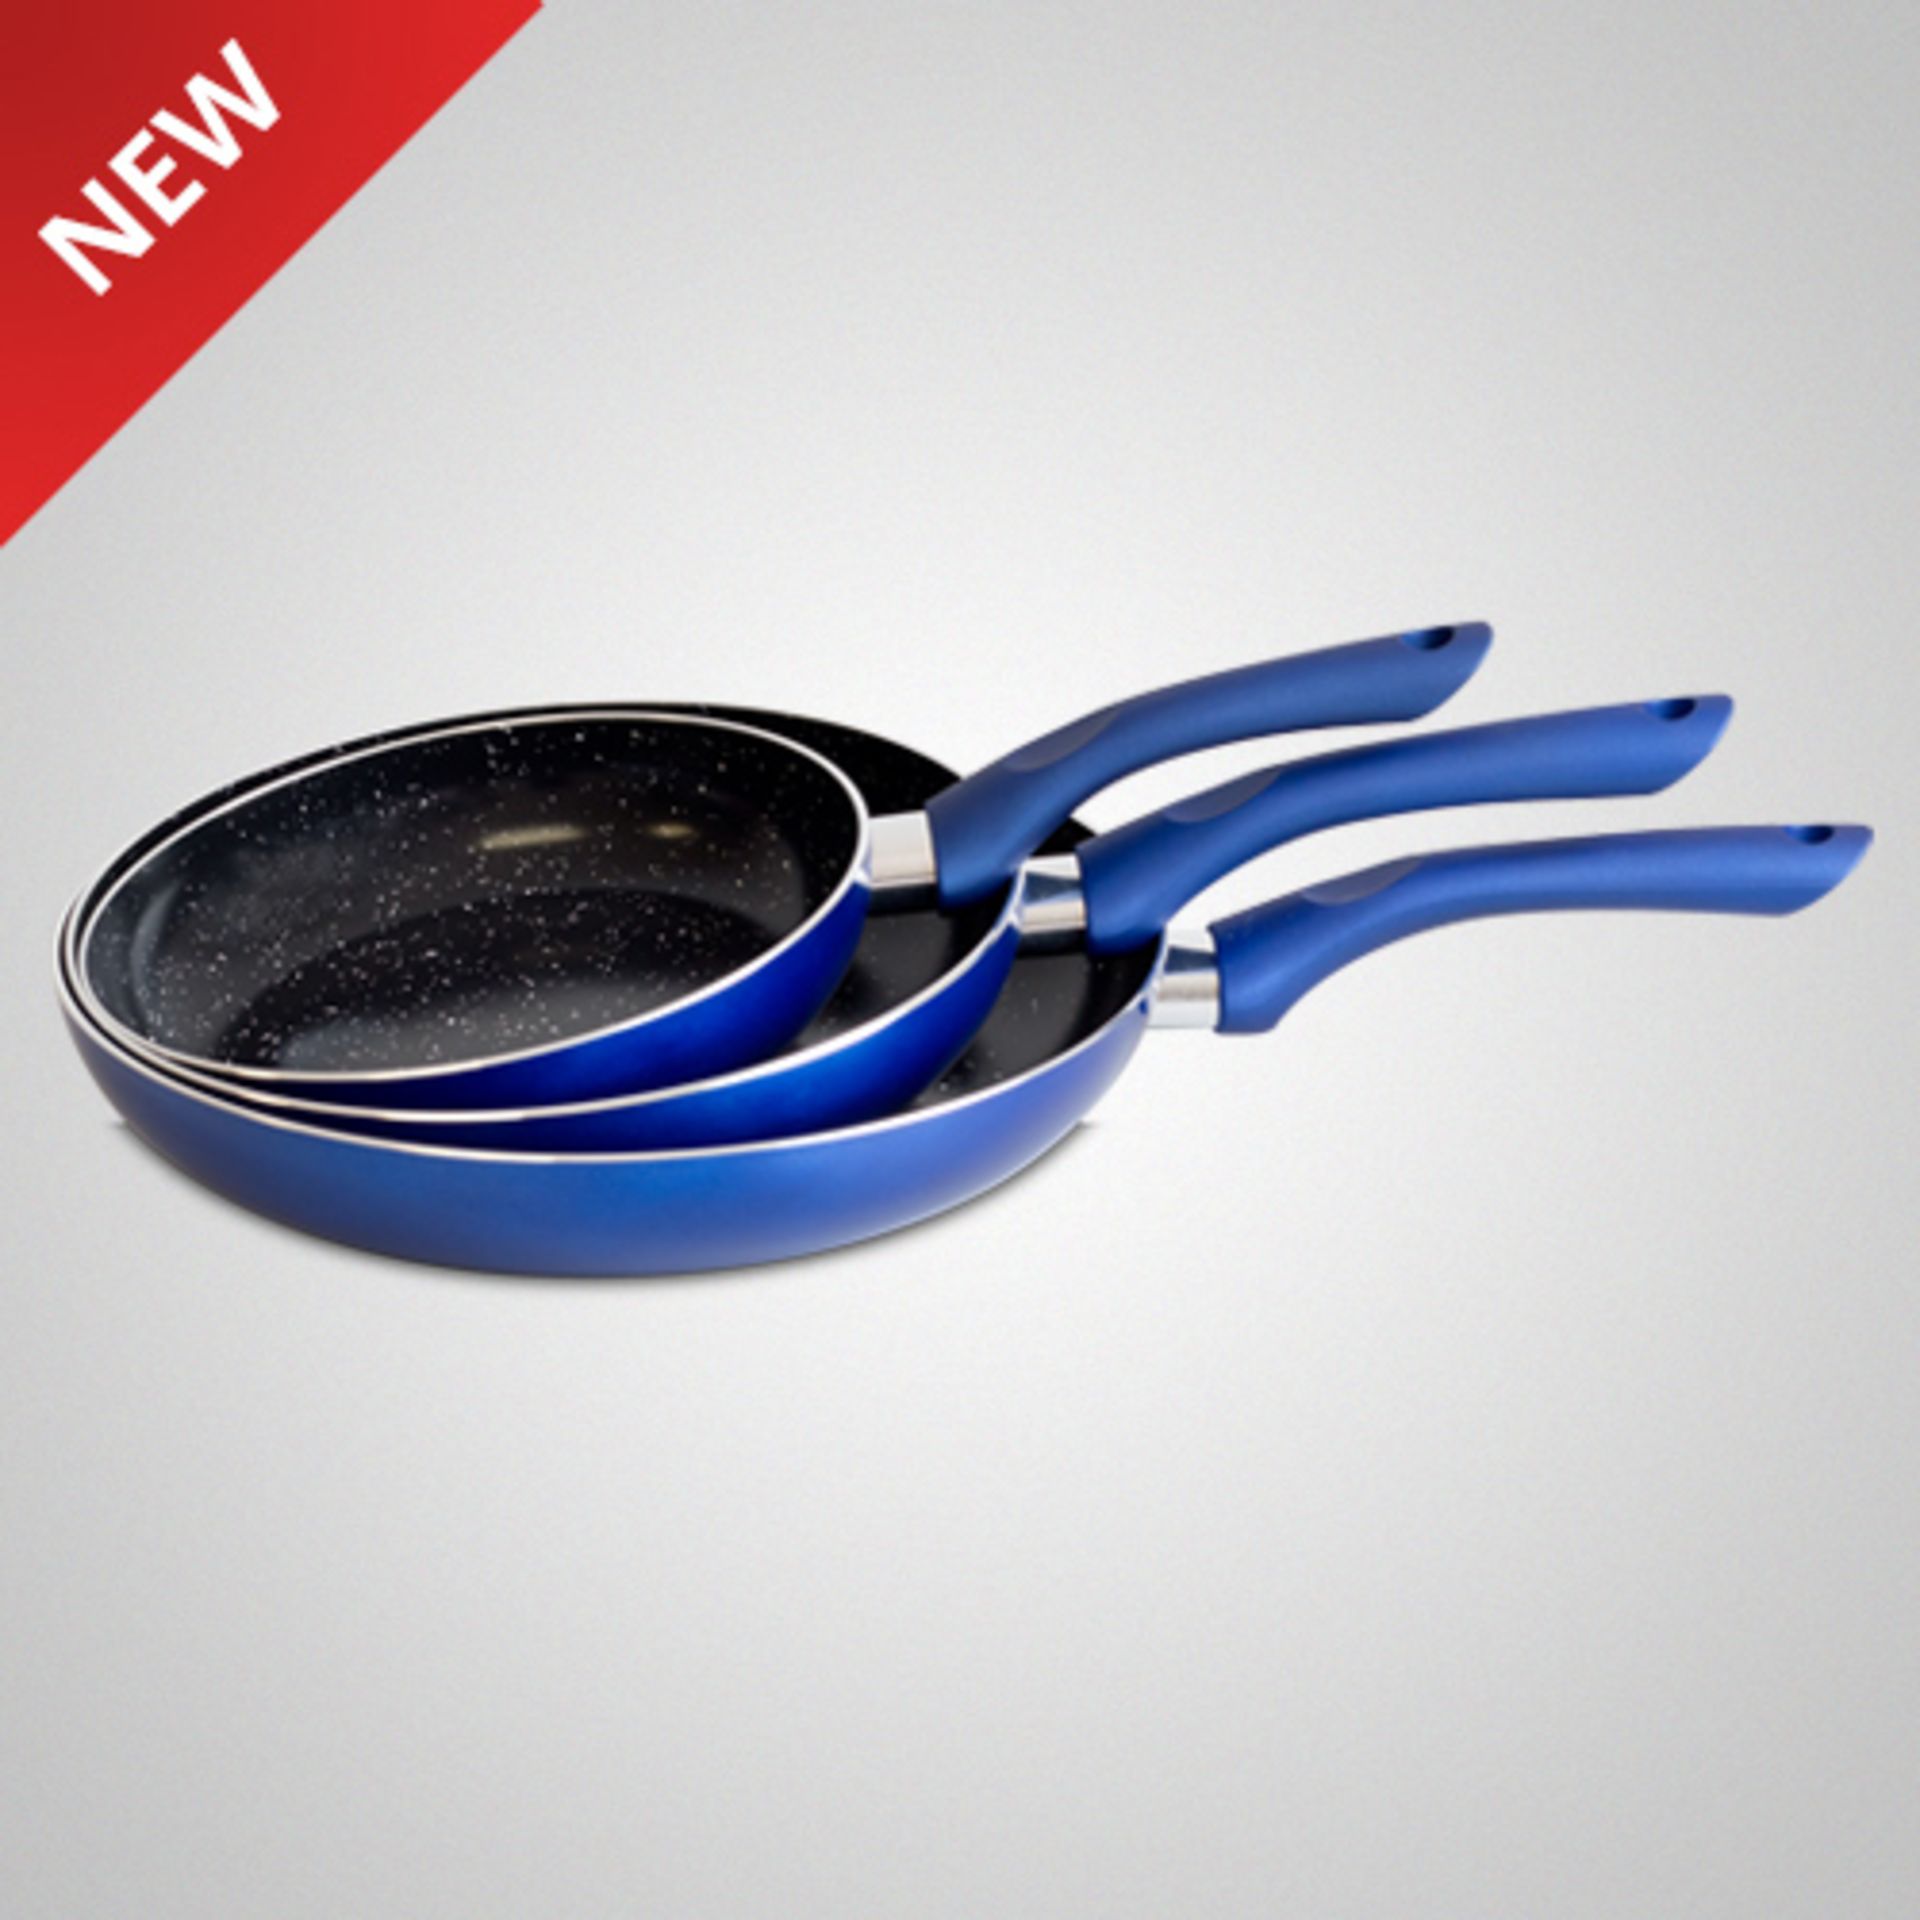 V Brand New Set Of 3 Non Stick Frying Pans Soft Touch Handle Blue RRP 99Euros X 2 YOUR BID PRICE